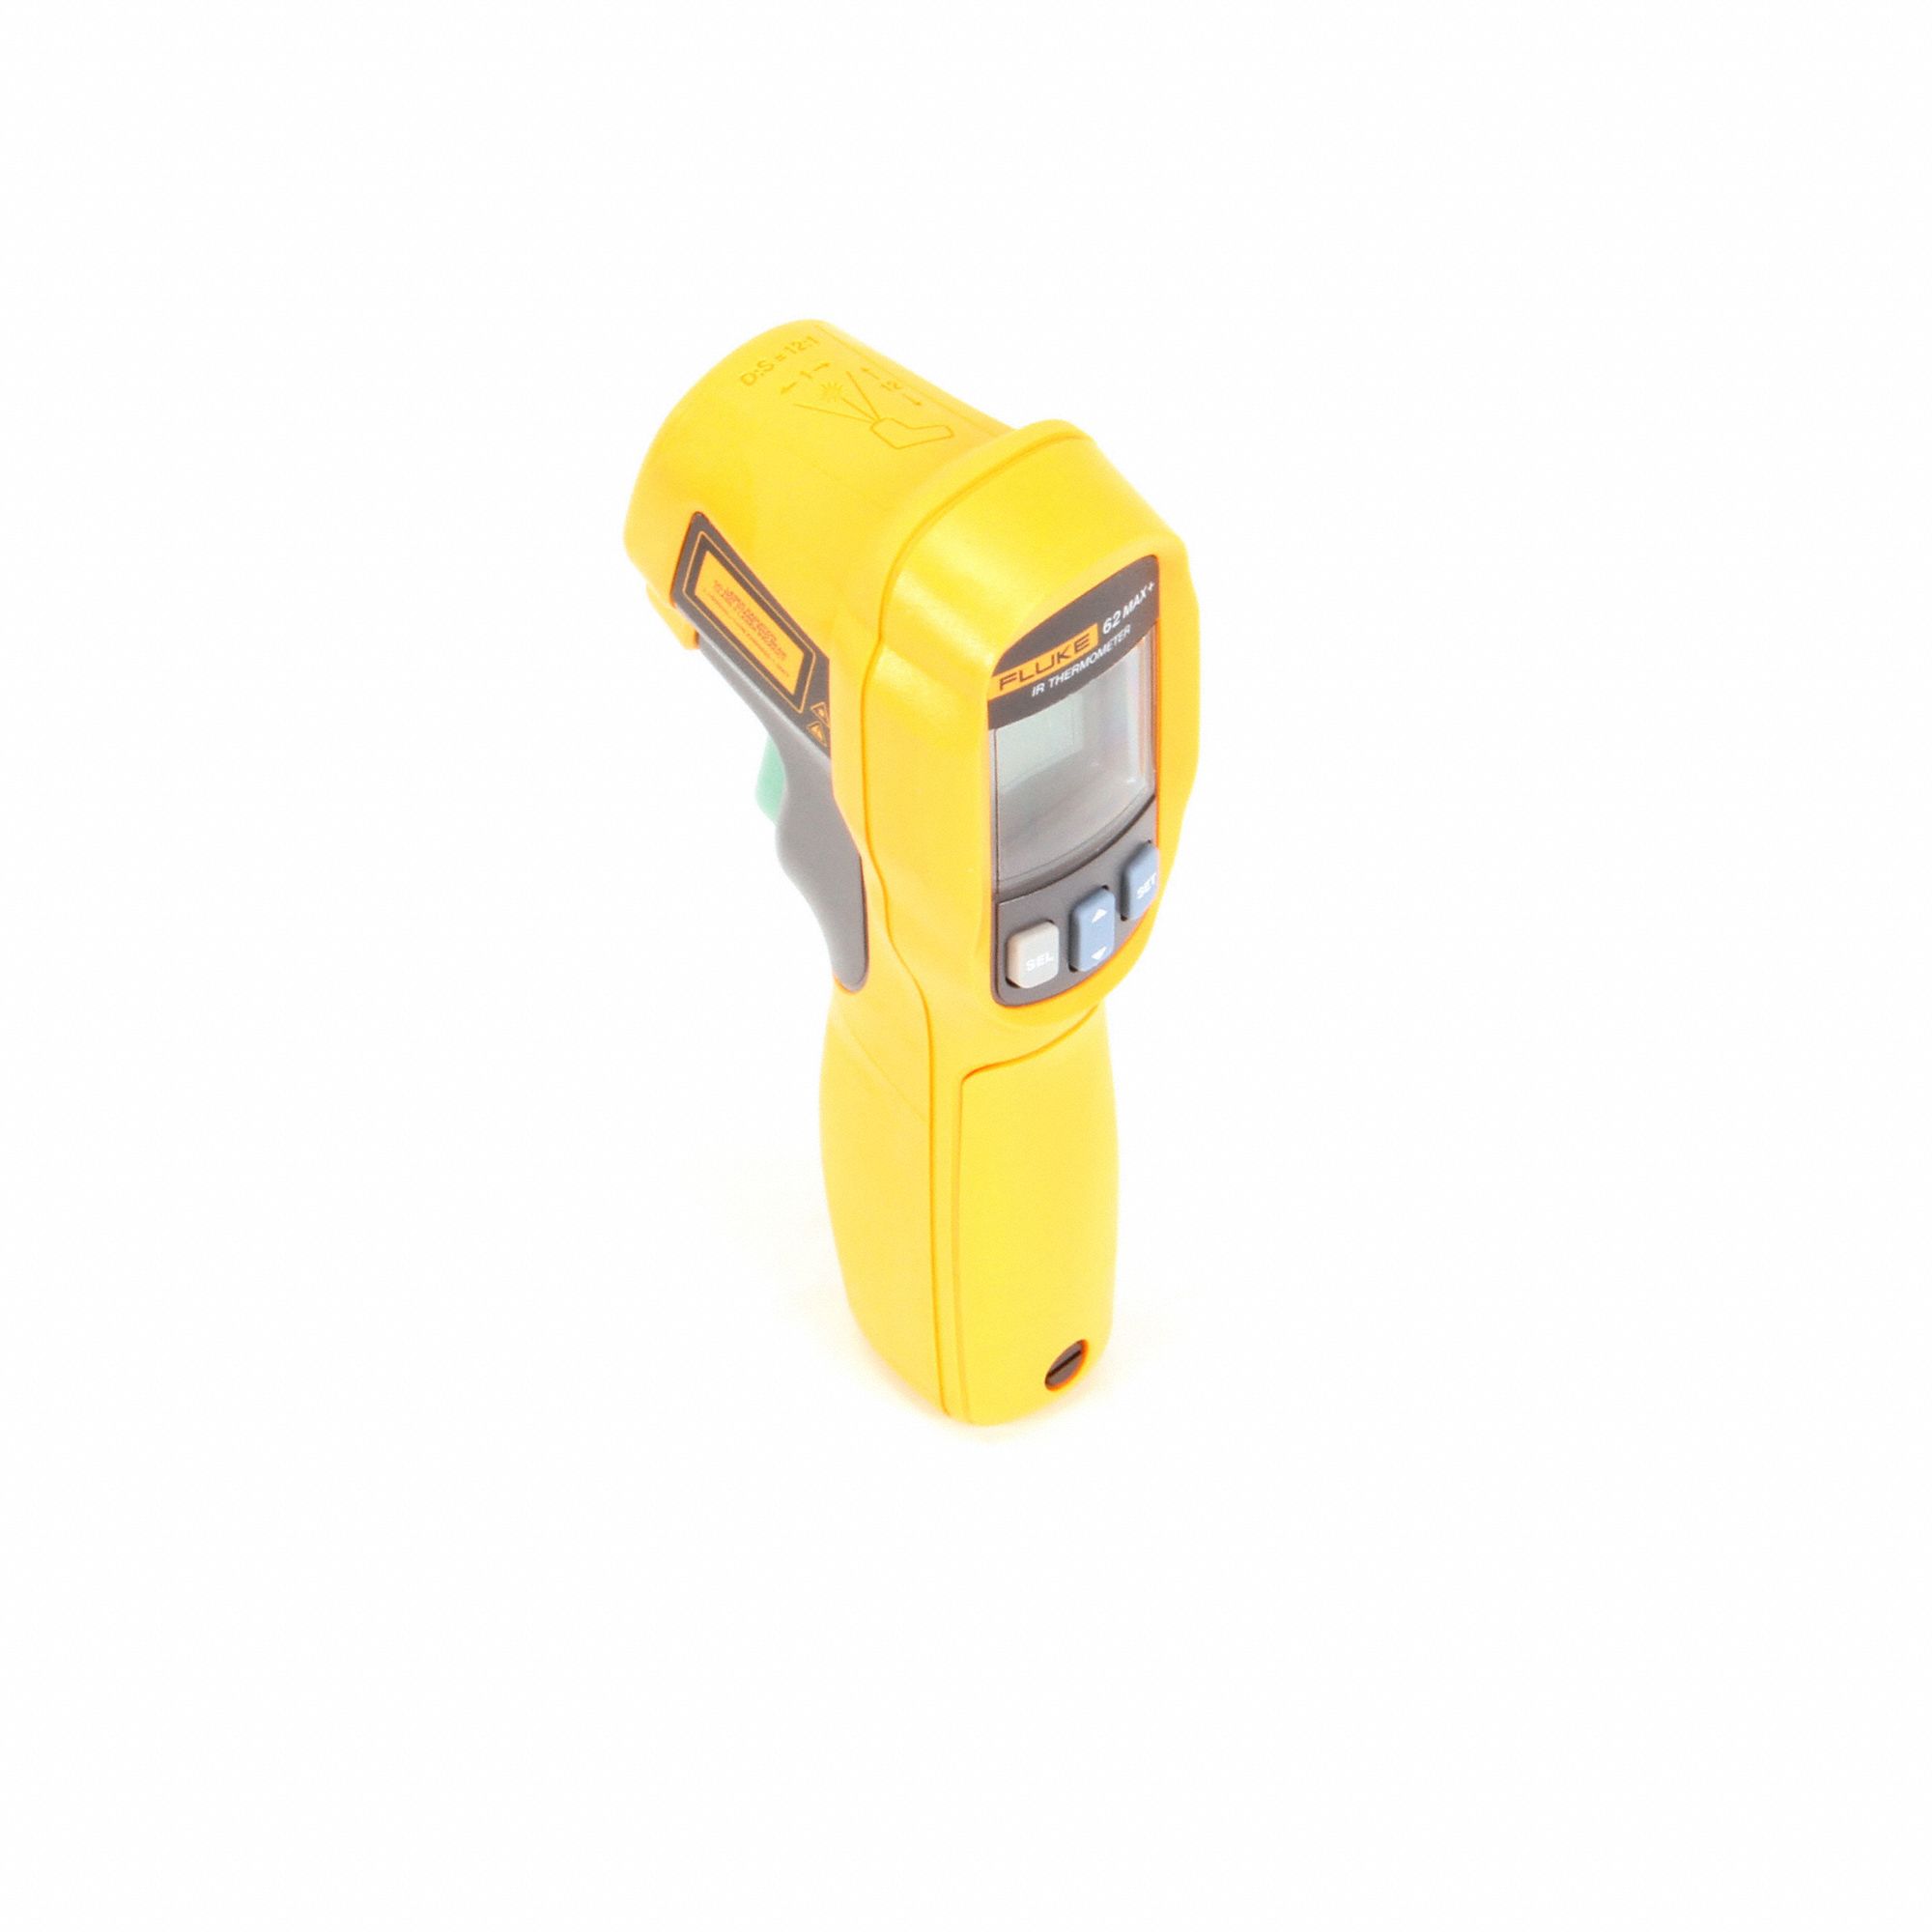 IRTN205L Infrared Thermometer Infrared Thermometers Fast shipping